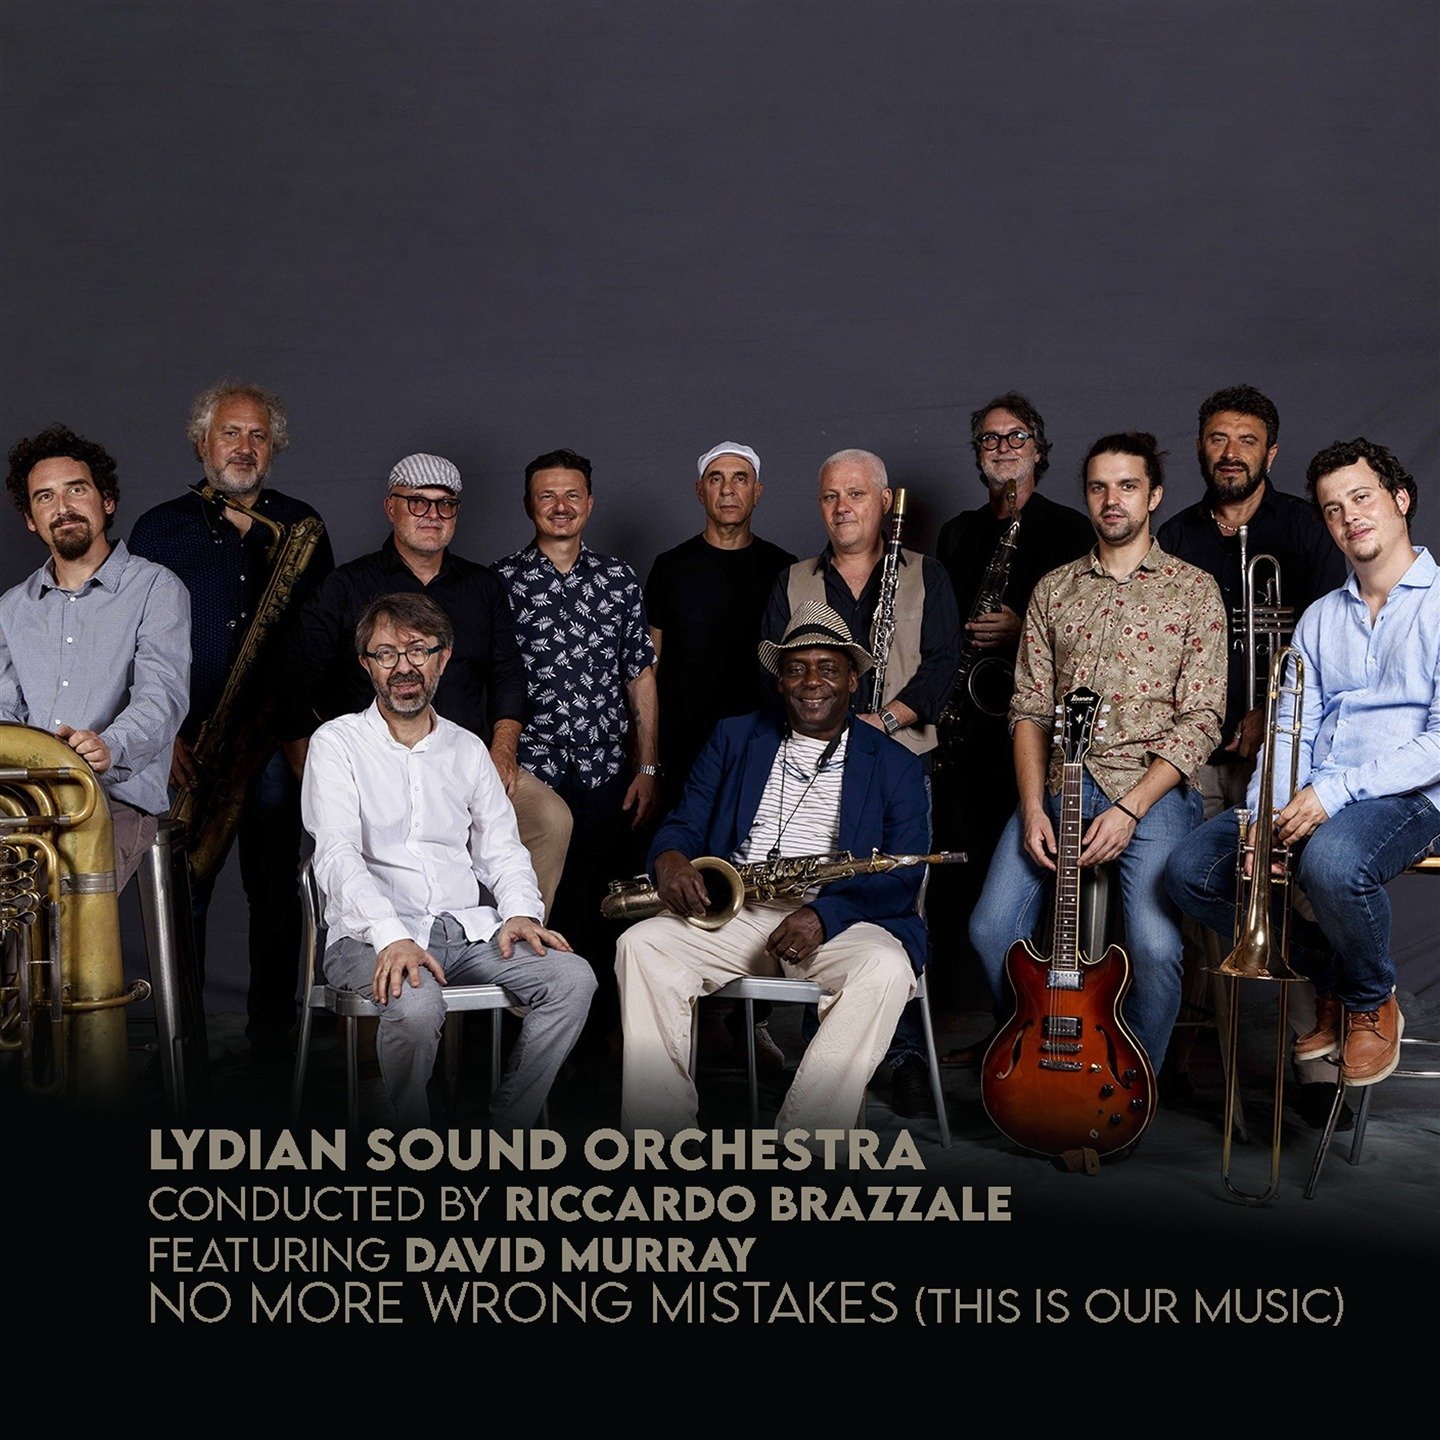 CD Shop - LYDIAN SOUND ORCHESTRA NO MORE WRONG MISTAKES (THIS IS OUR MUSIC)